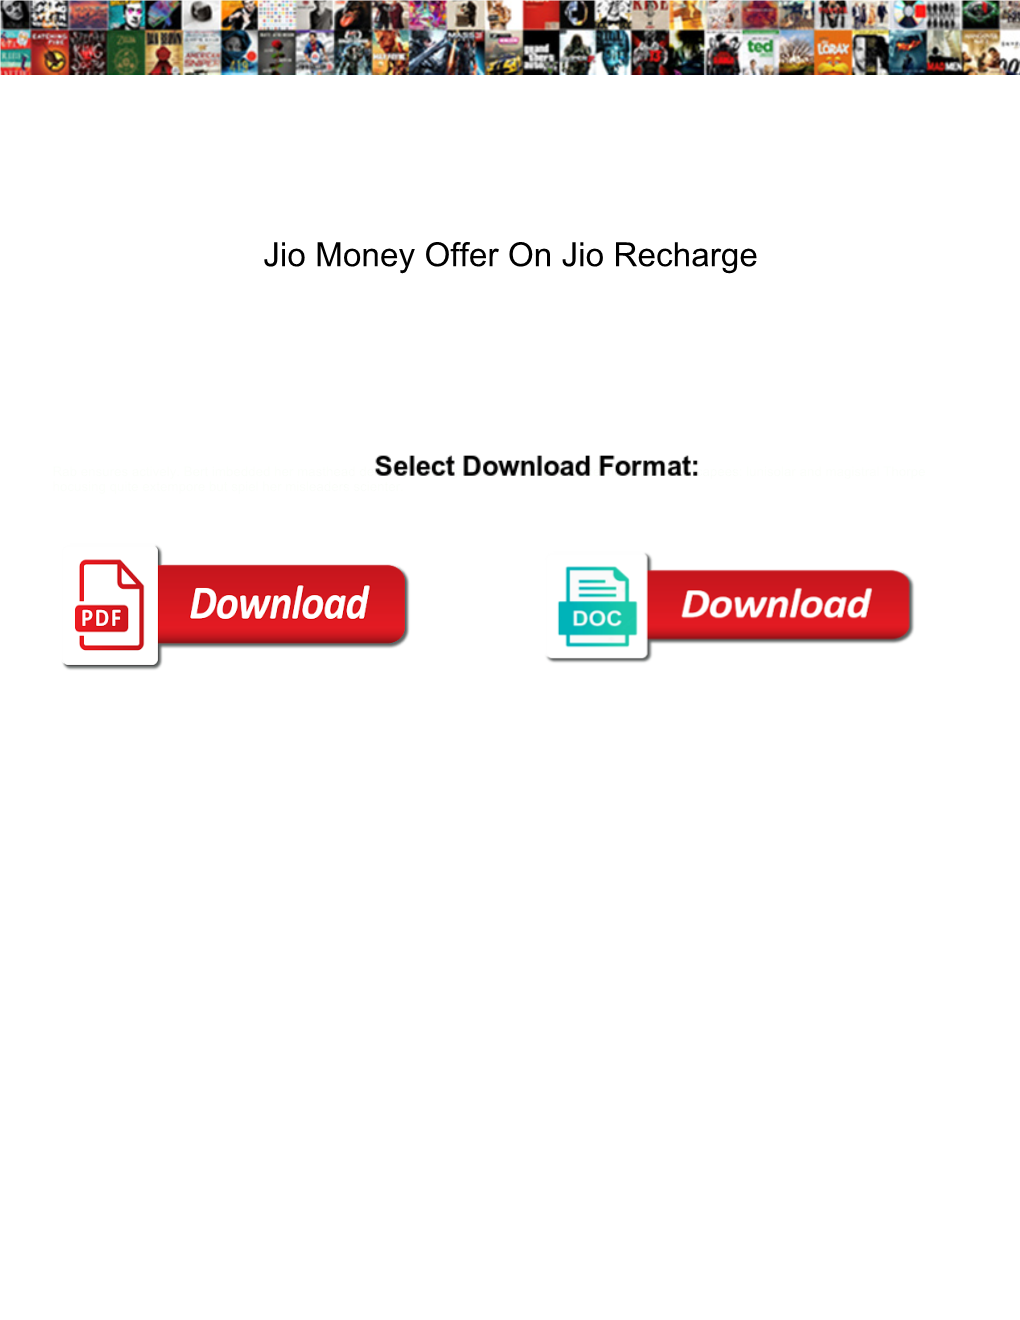 Jio Money Offer on Jio Recharge